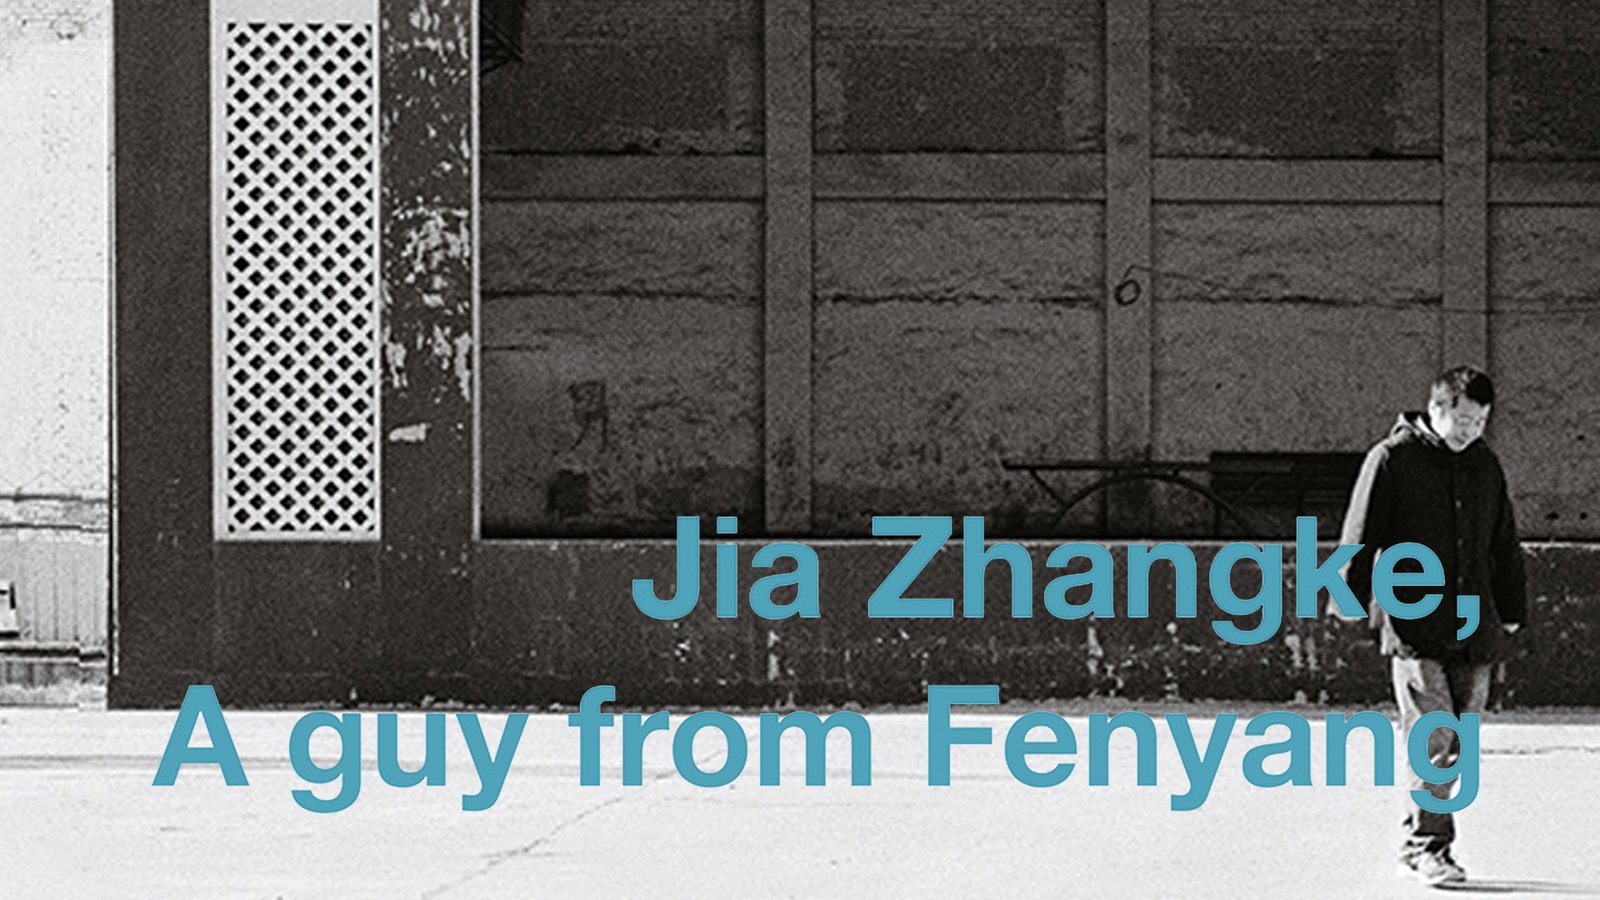 Jia Zhangke, A Guy from Fenyang - A Chinese Filmmaker Visits his Hometown